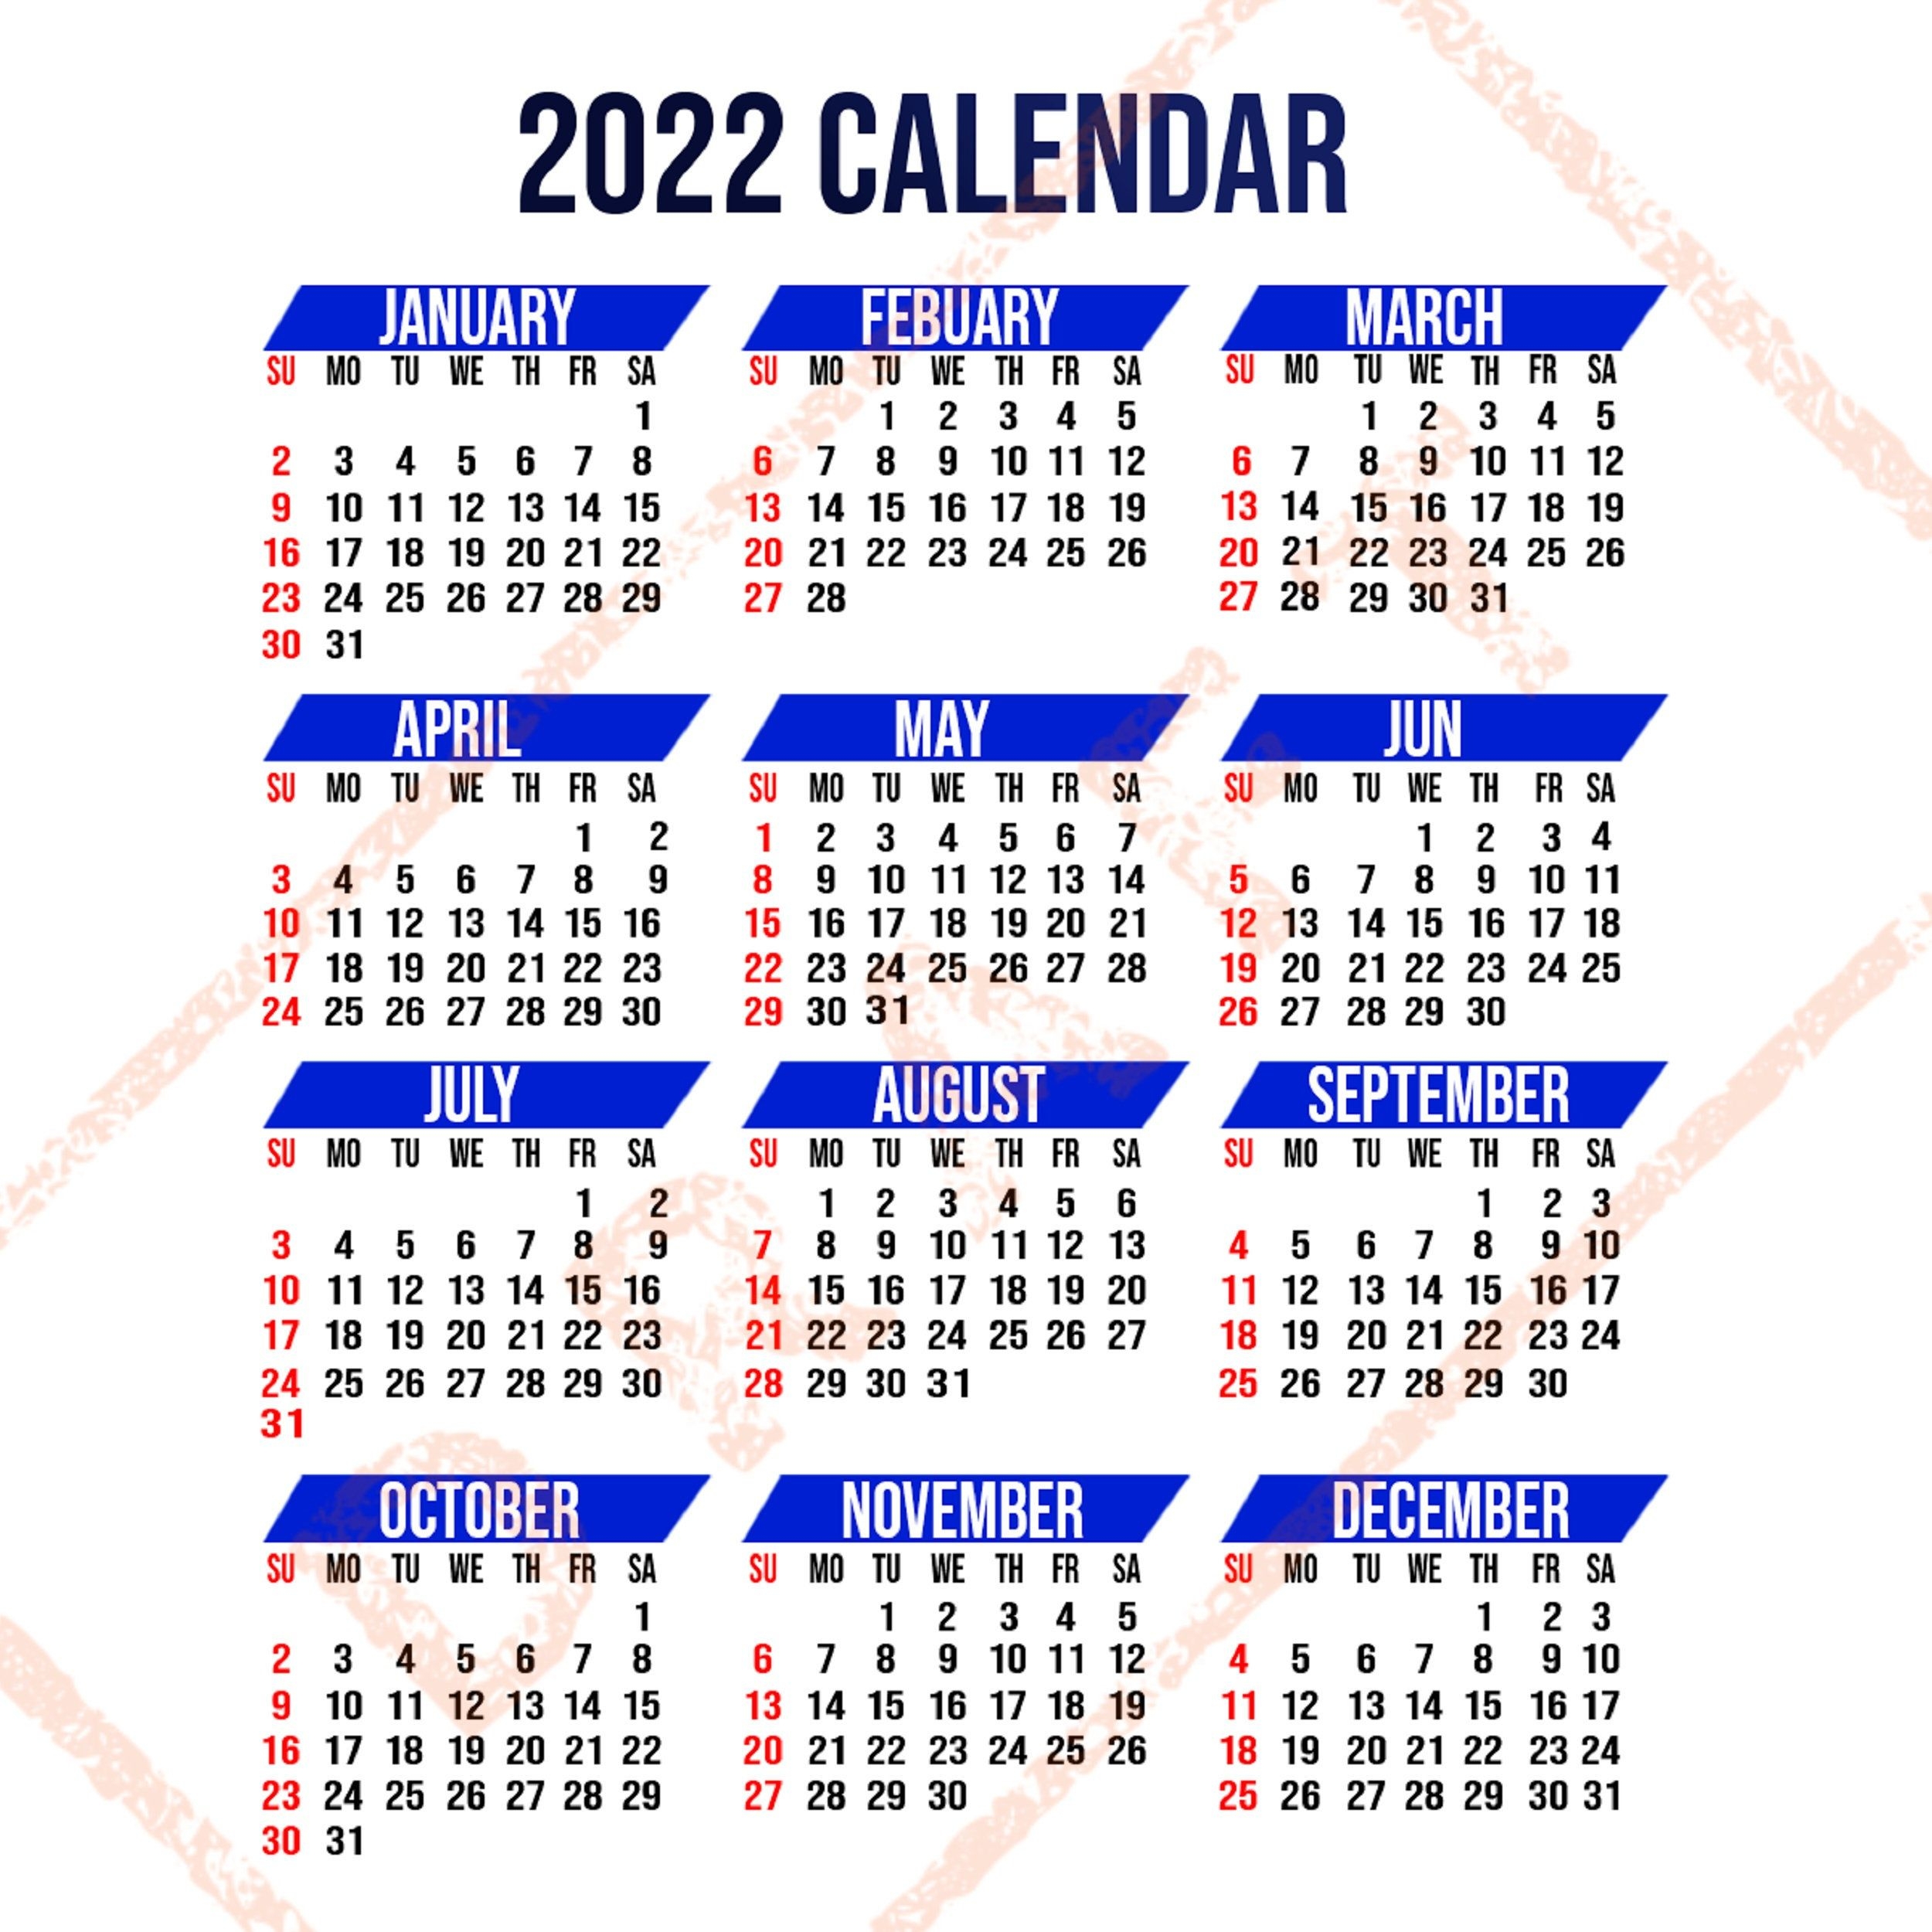 effective 12 month calendar 2022 malaysia get your